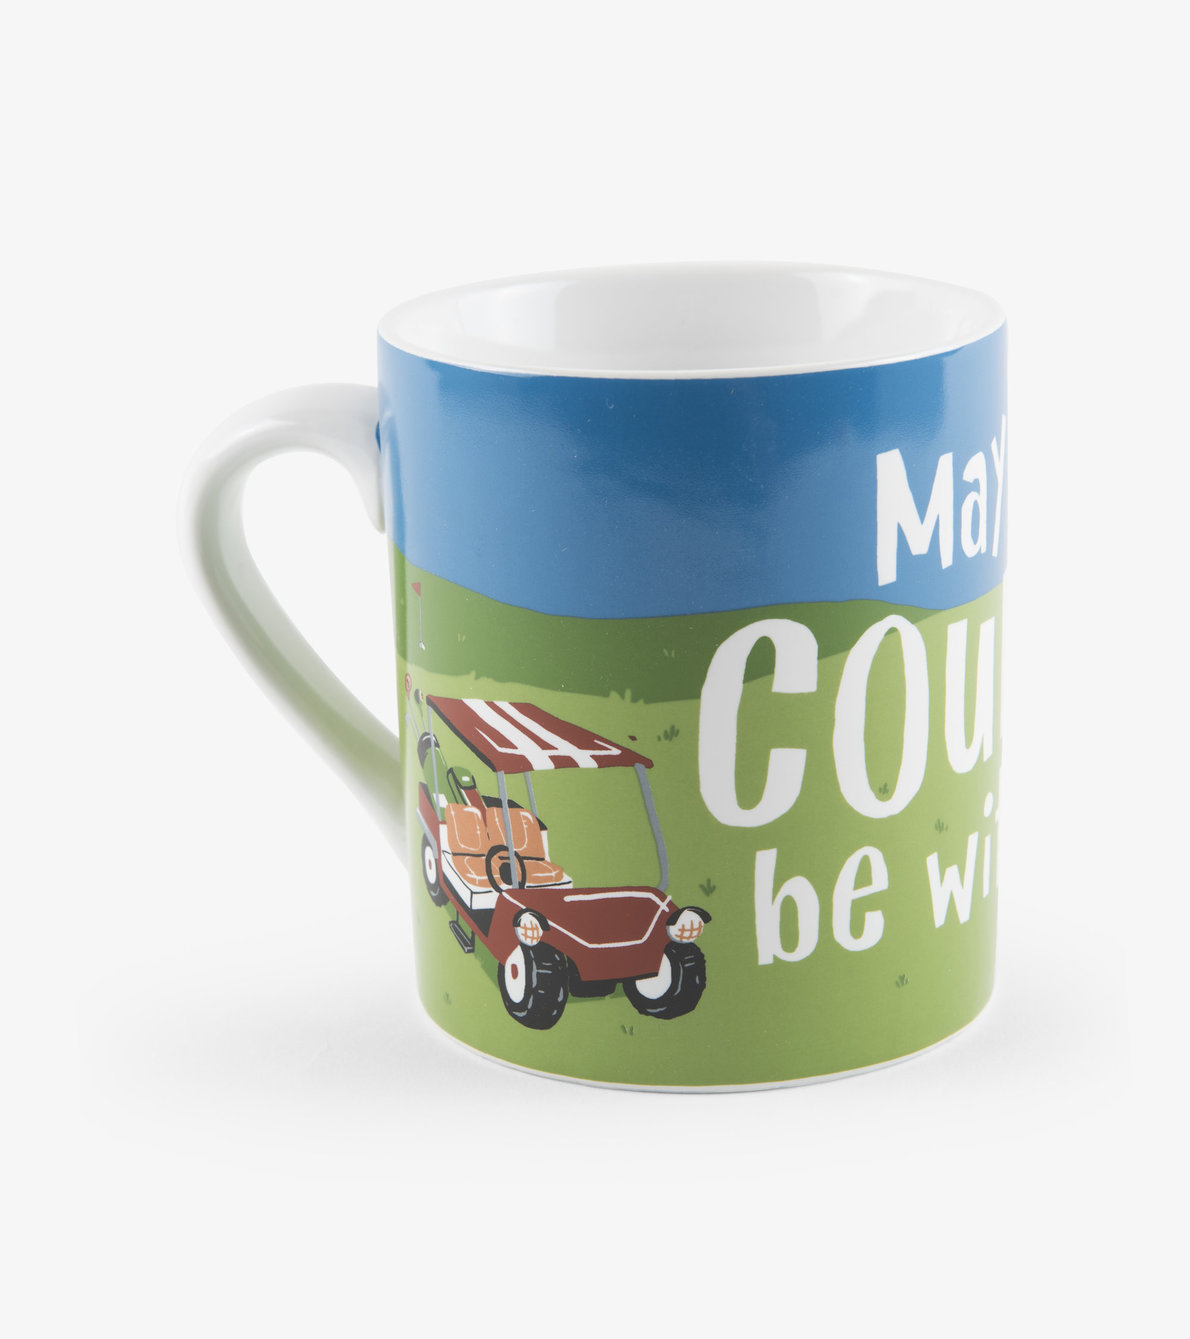 View larger image of May The Course Be With You Ceramic Mug